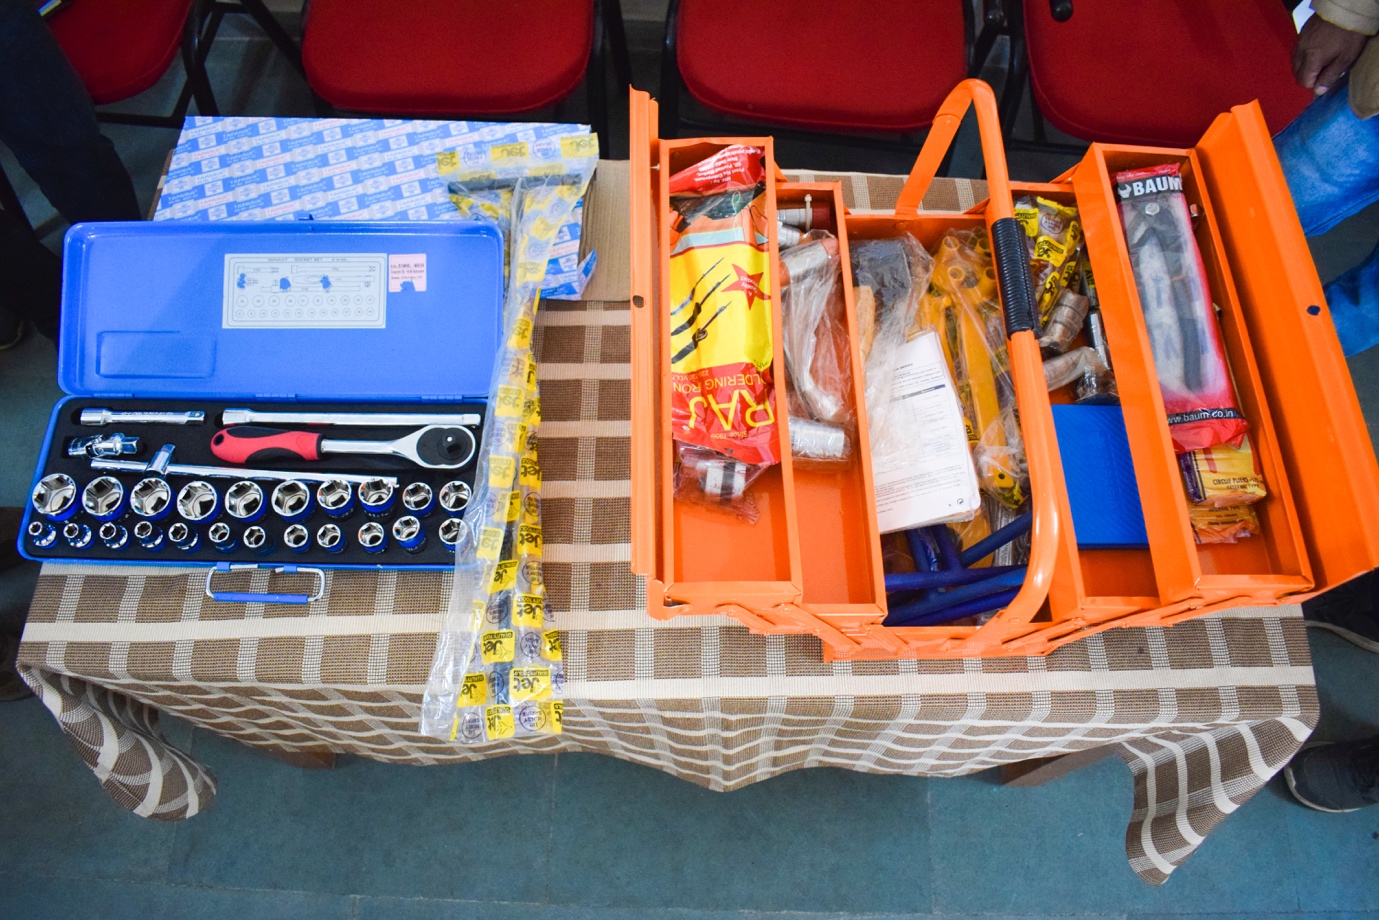 Tool box distributed during the ceremony